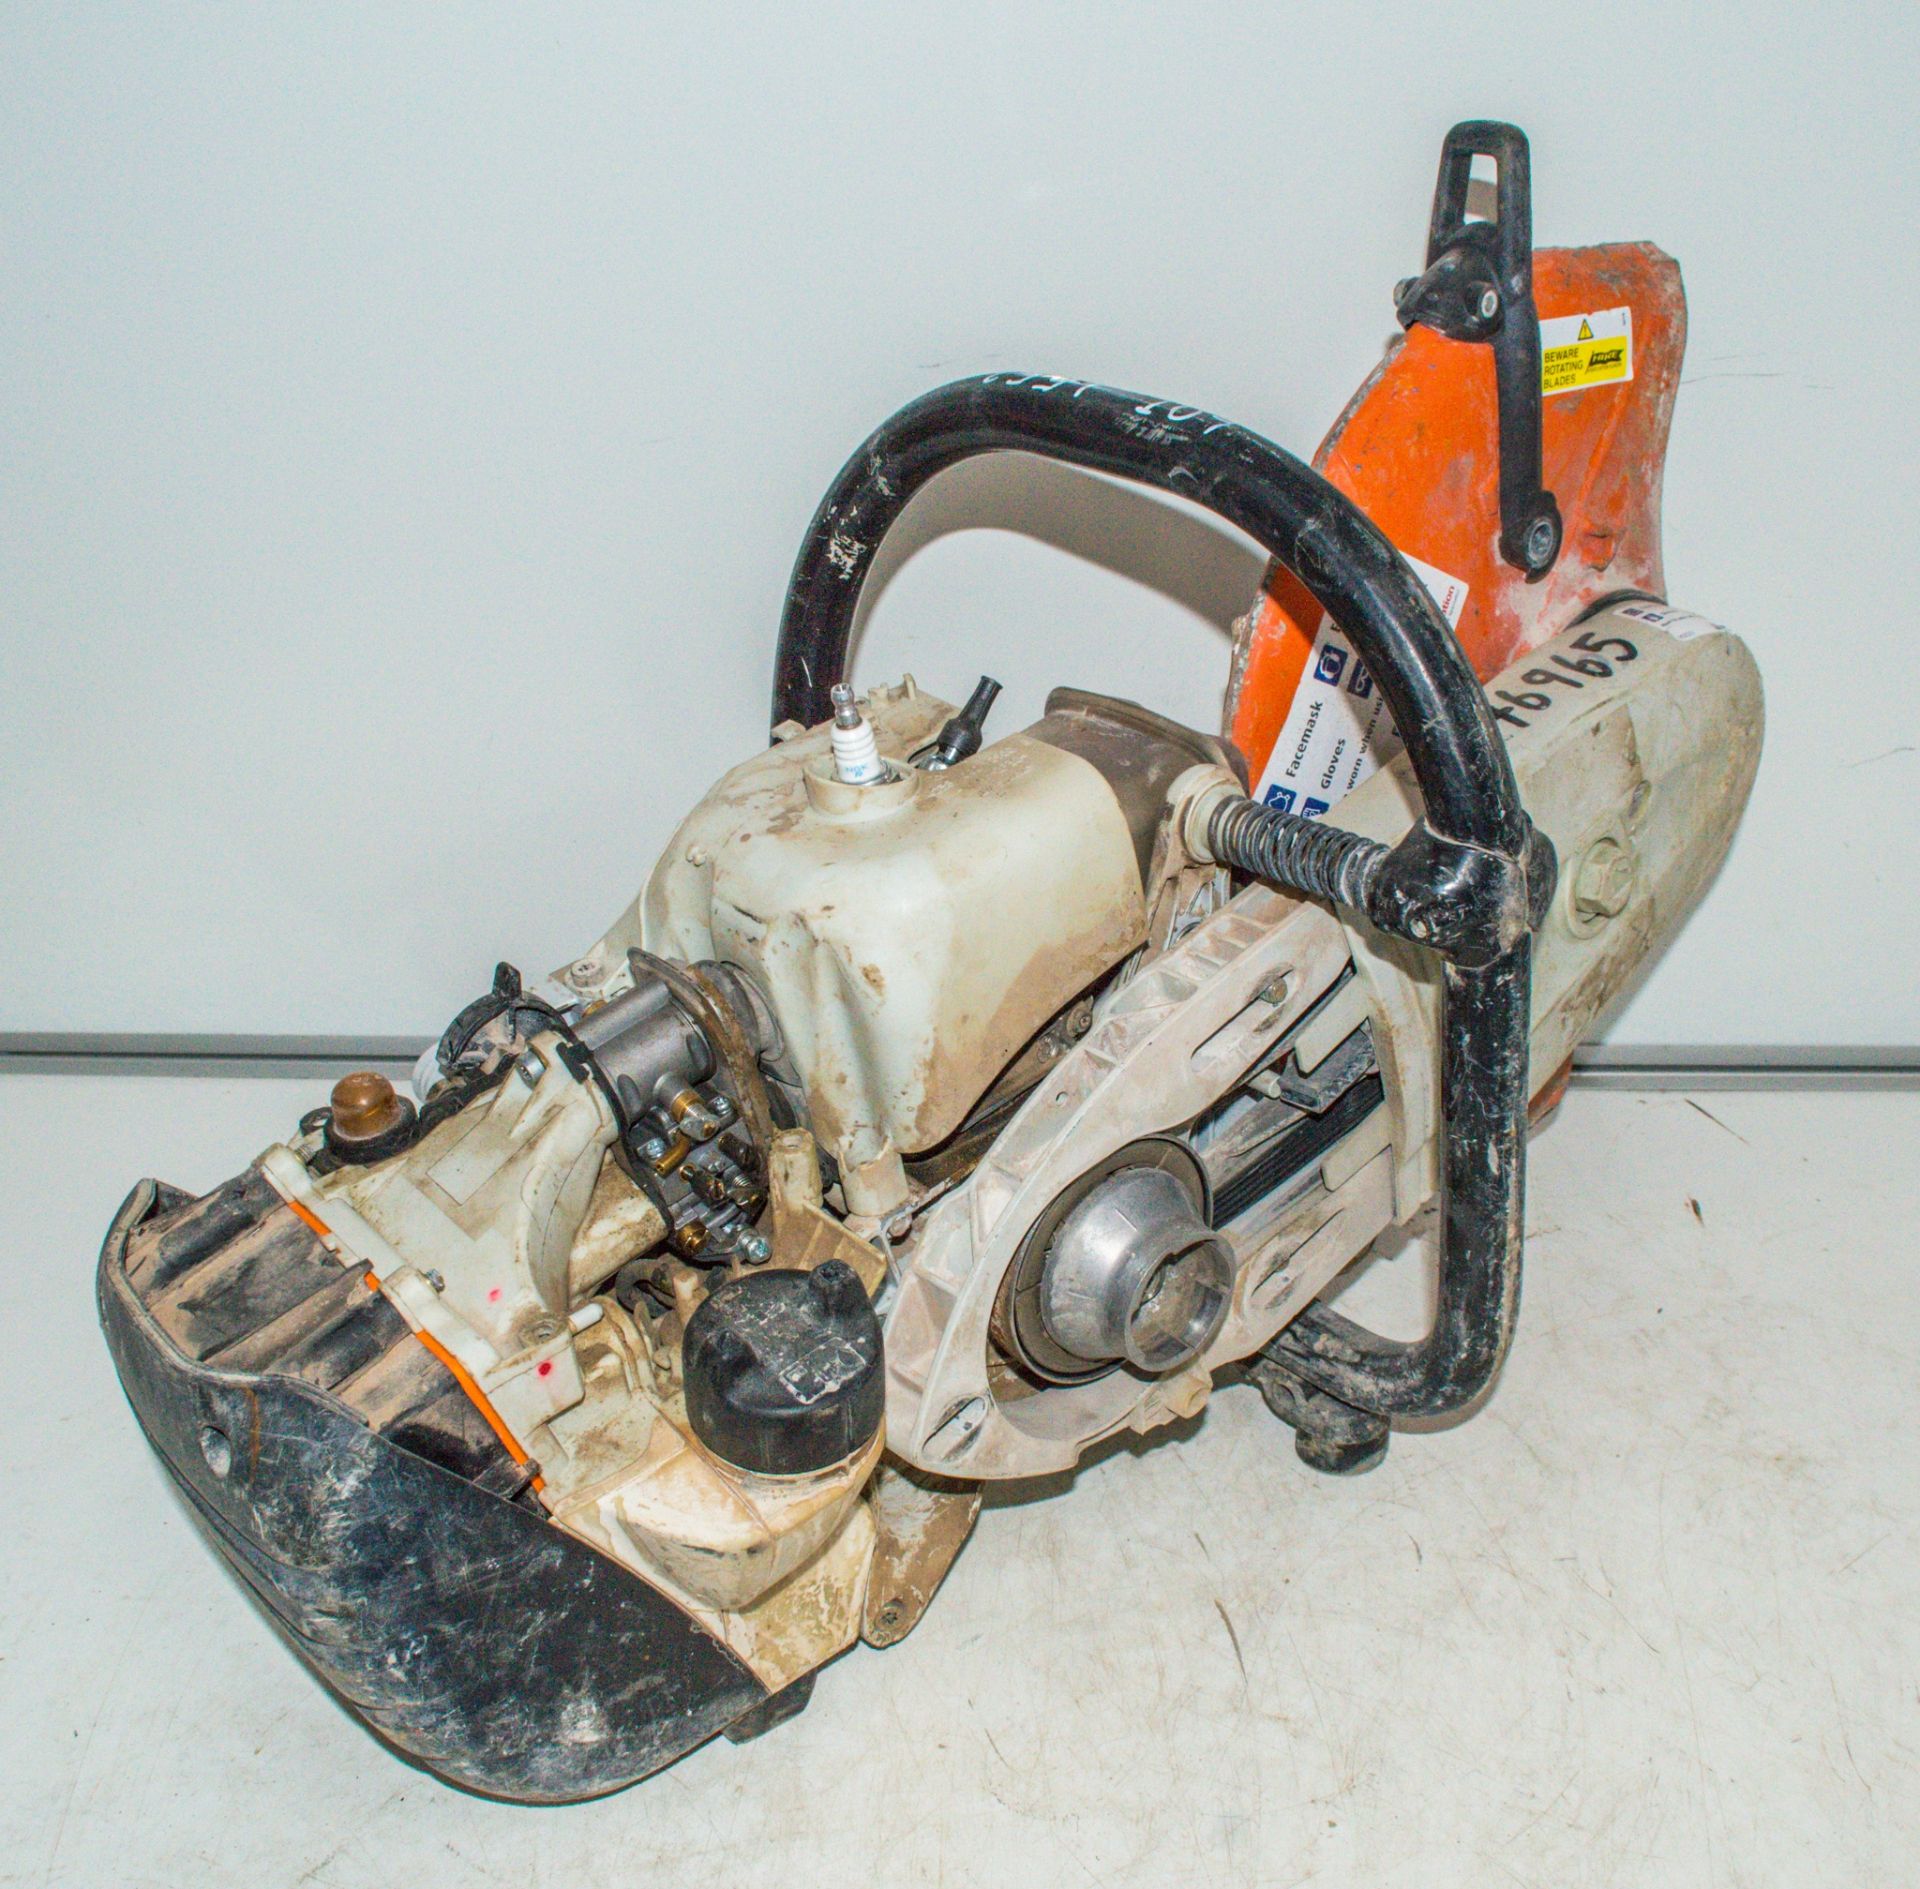 Stihl TS410 petrol driven cut off saw 02236965 ** Pull cord assembly & casing missing ** - Image 2 of 2